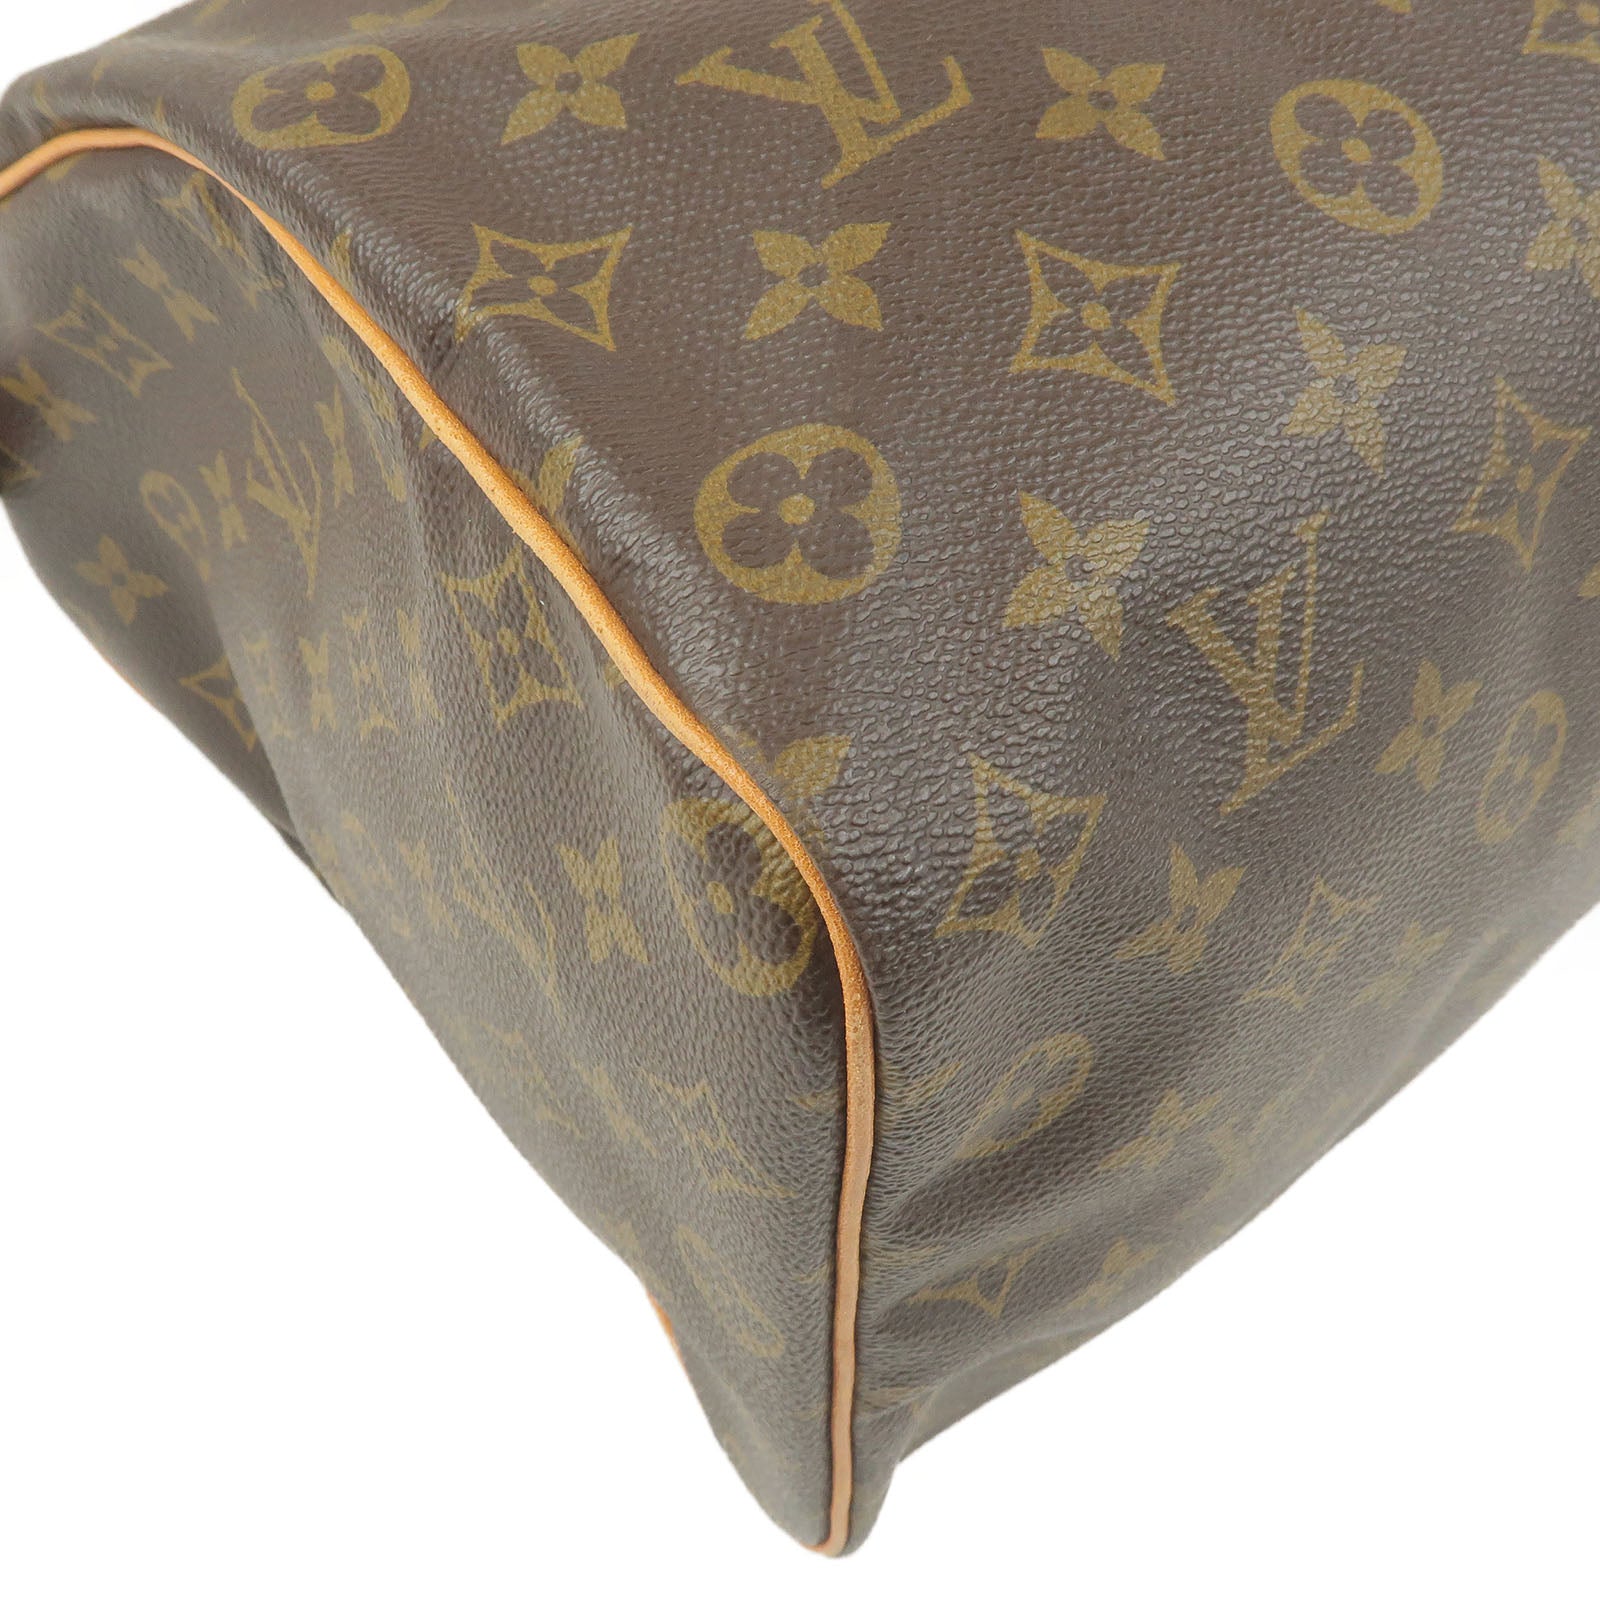 Louis Vuitton 2012 pre-owned Speedy Bandouliere 35 tote bag